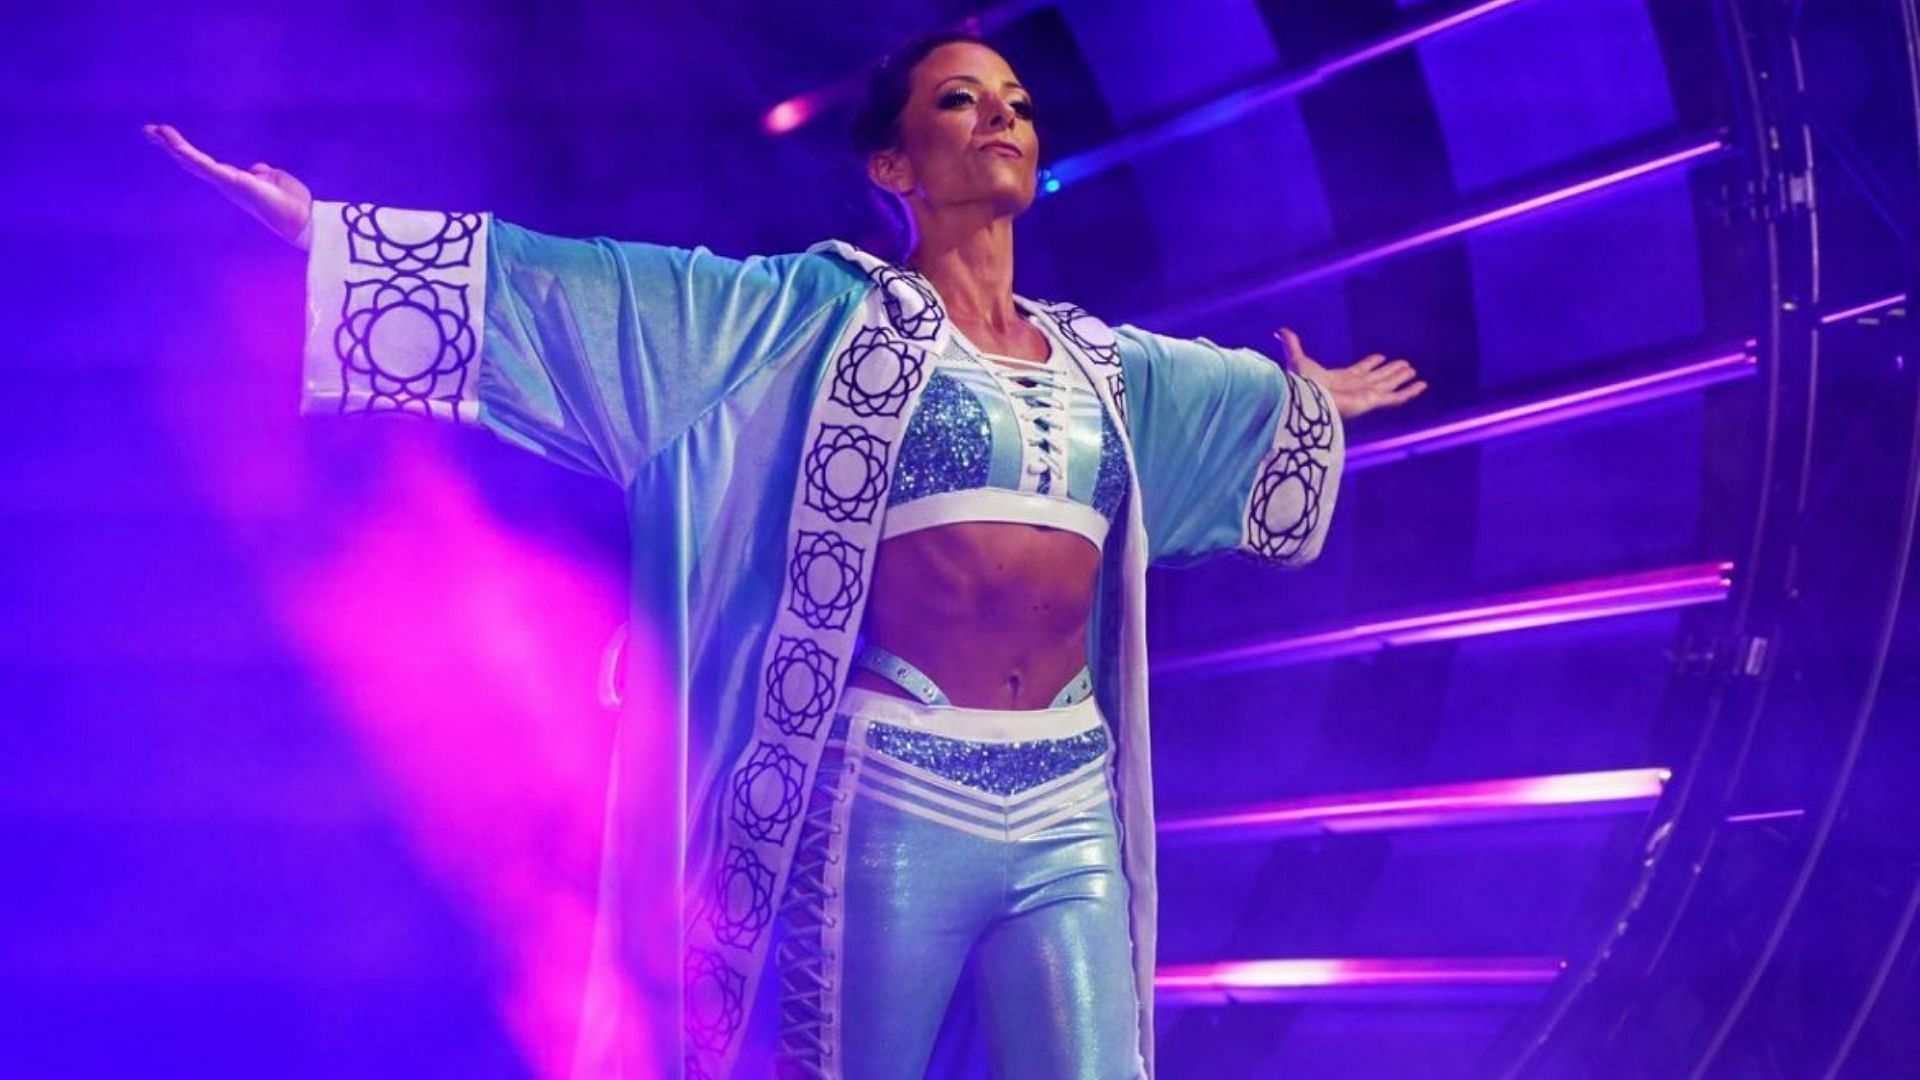 Serena Deeb making her entrance at an AEW event in 2022